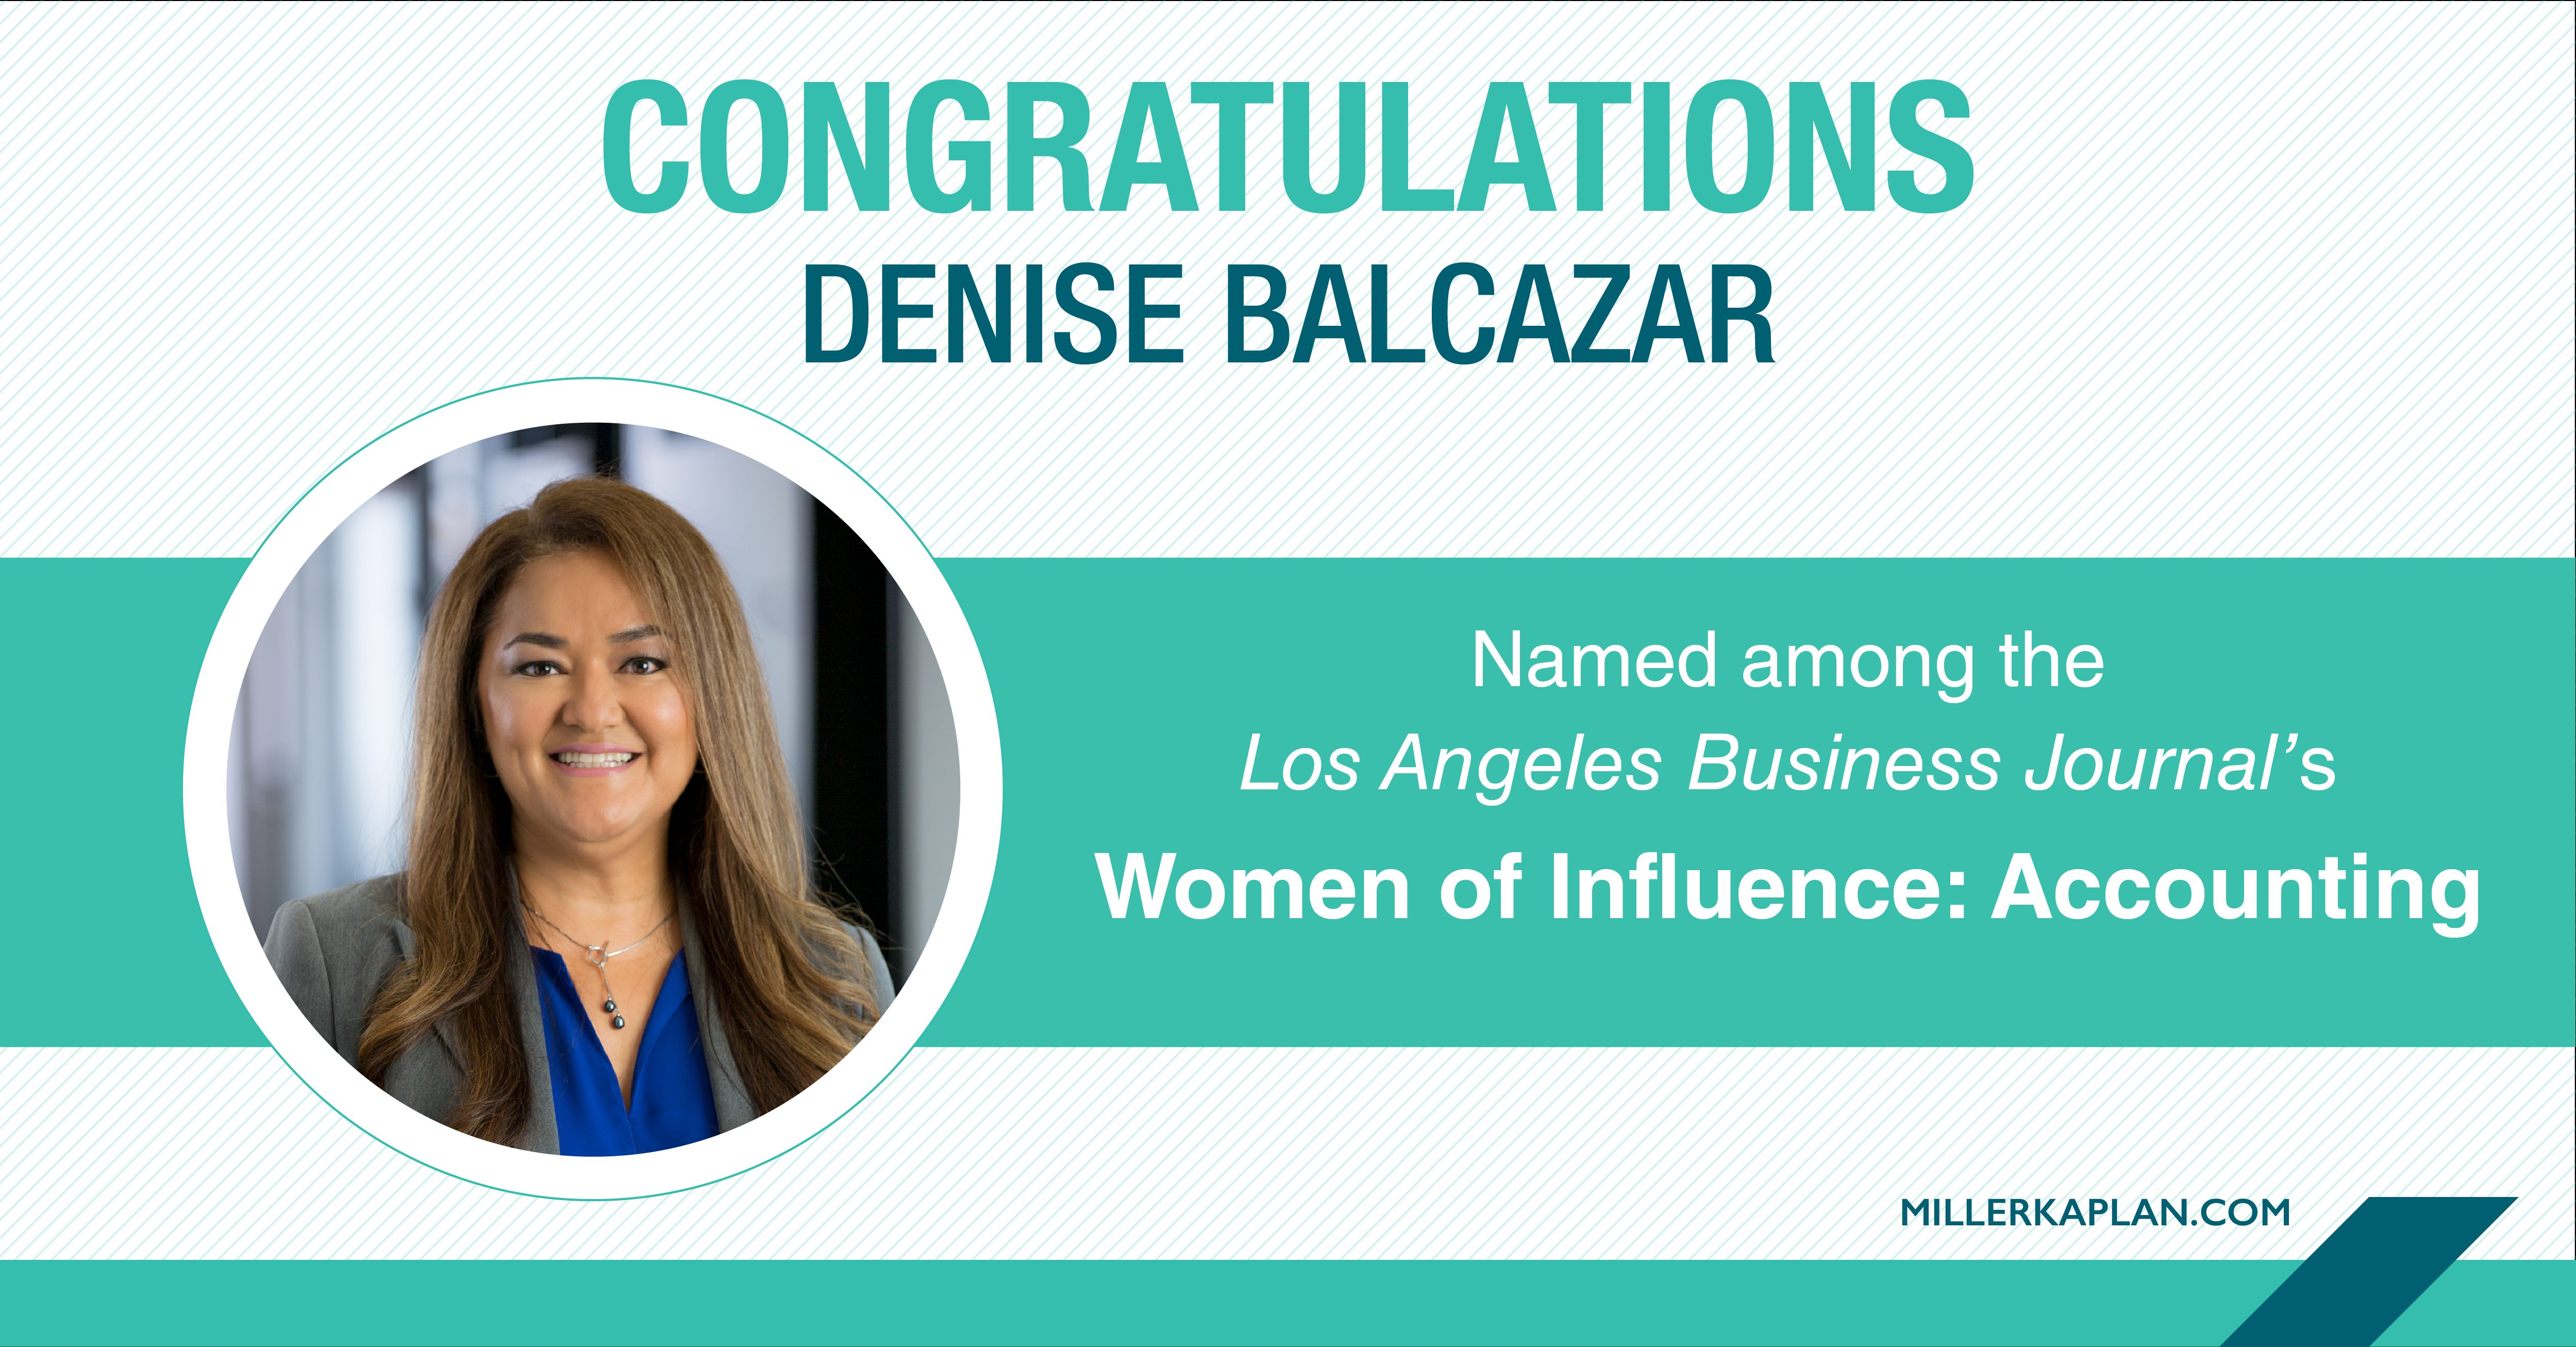 Denise Balcazar Recognized as Woman of Influence: Accounting | LABJ